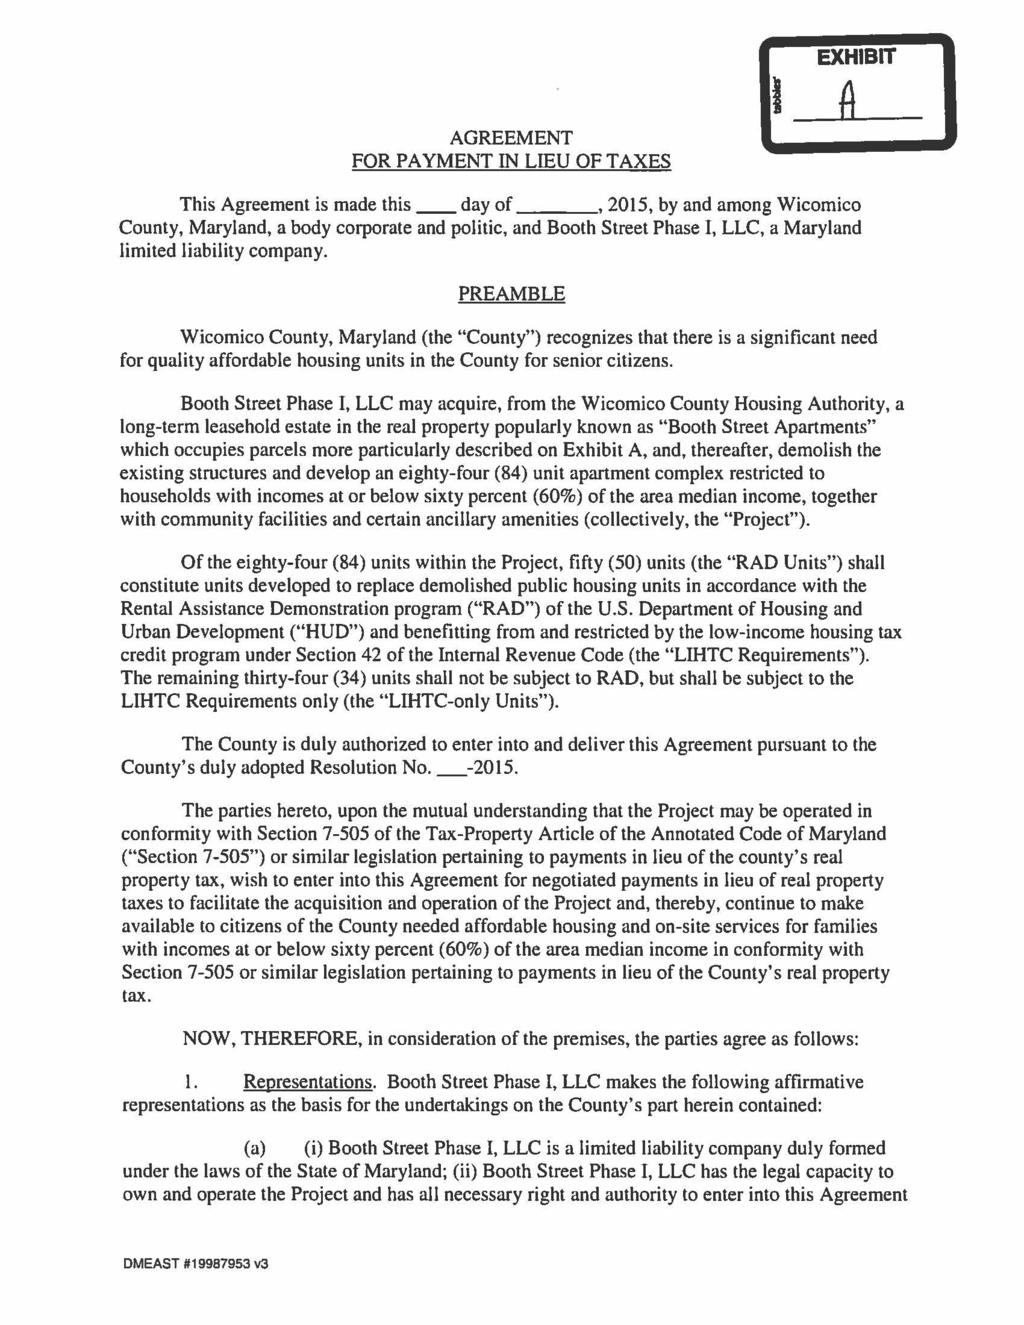 AGREEMENT FOR PAYMENT IN LIEU OF TAXES EXHIBIT I A This Agreement is made this day of, 2015, by and among Wicomico County, Maryland, a body corporate and politic, and Booth Street Phase I, LLC, a